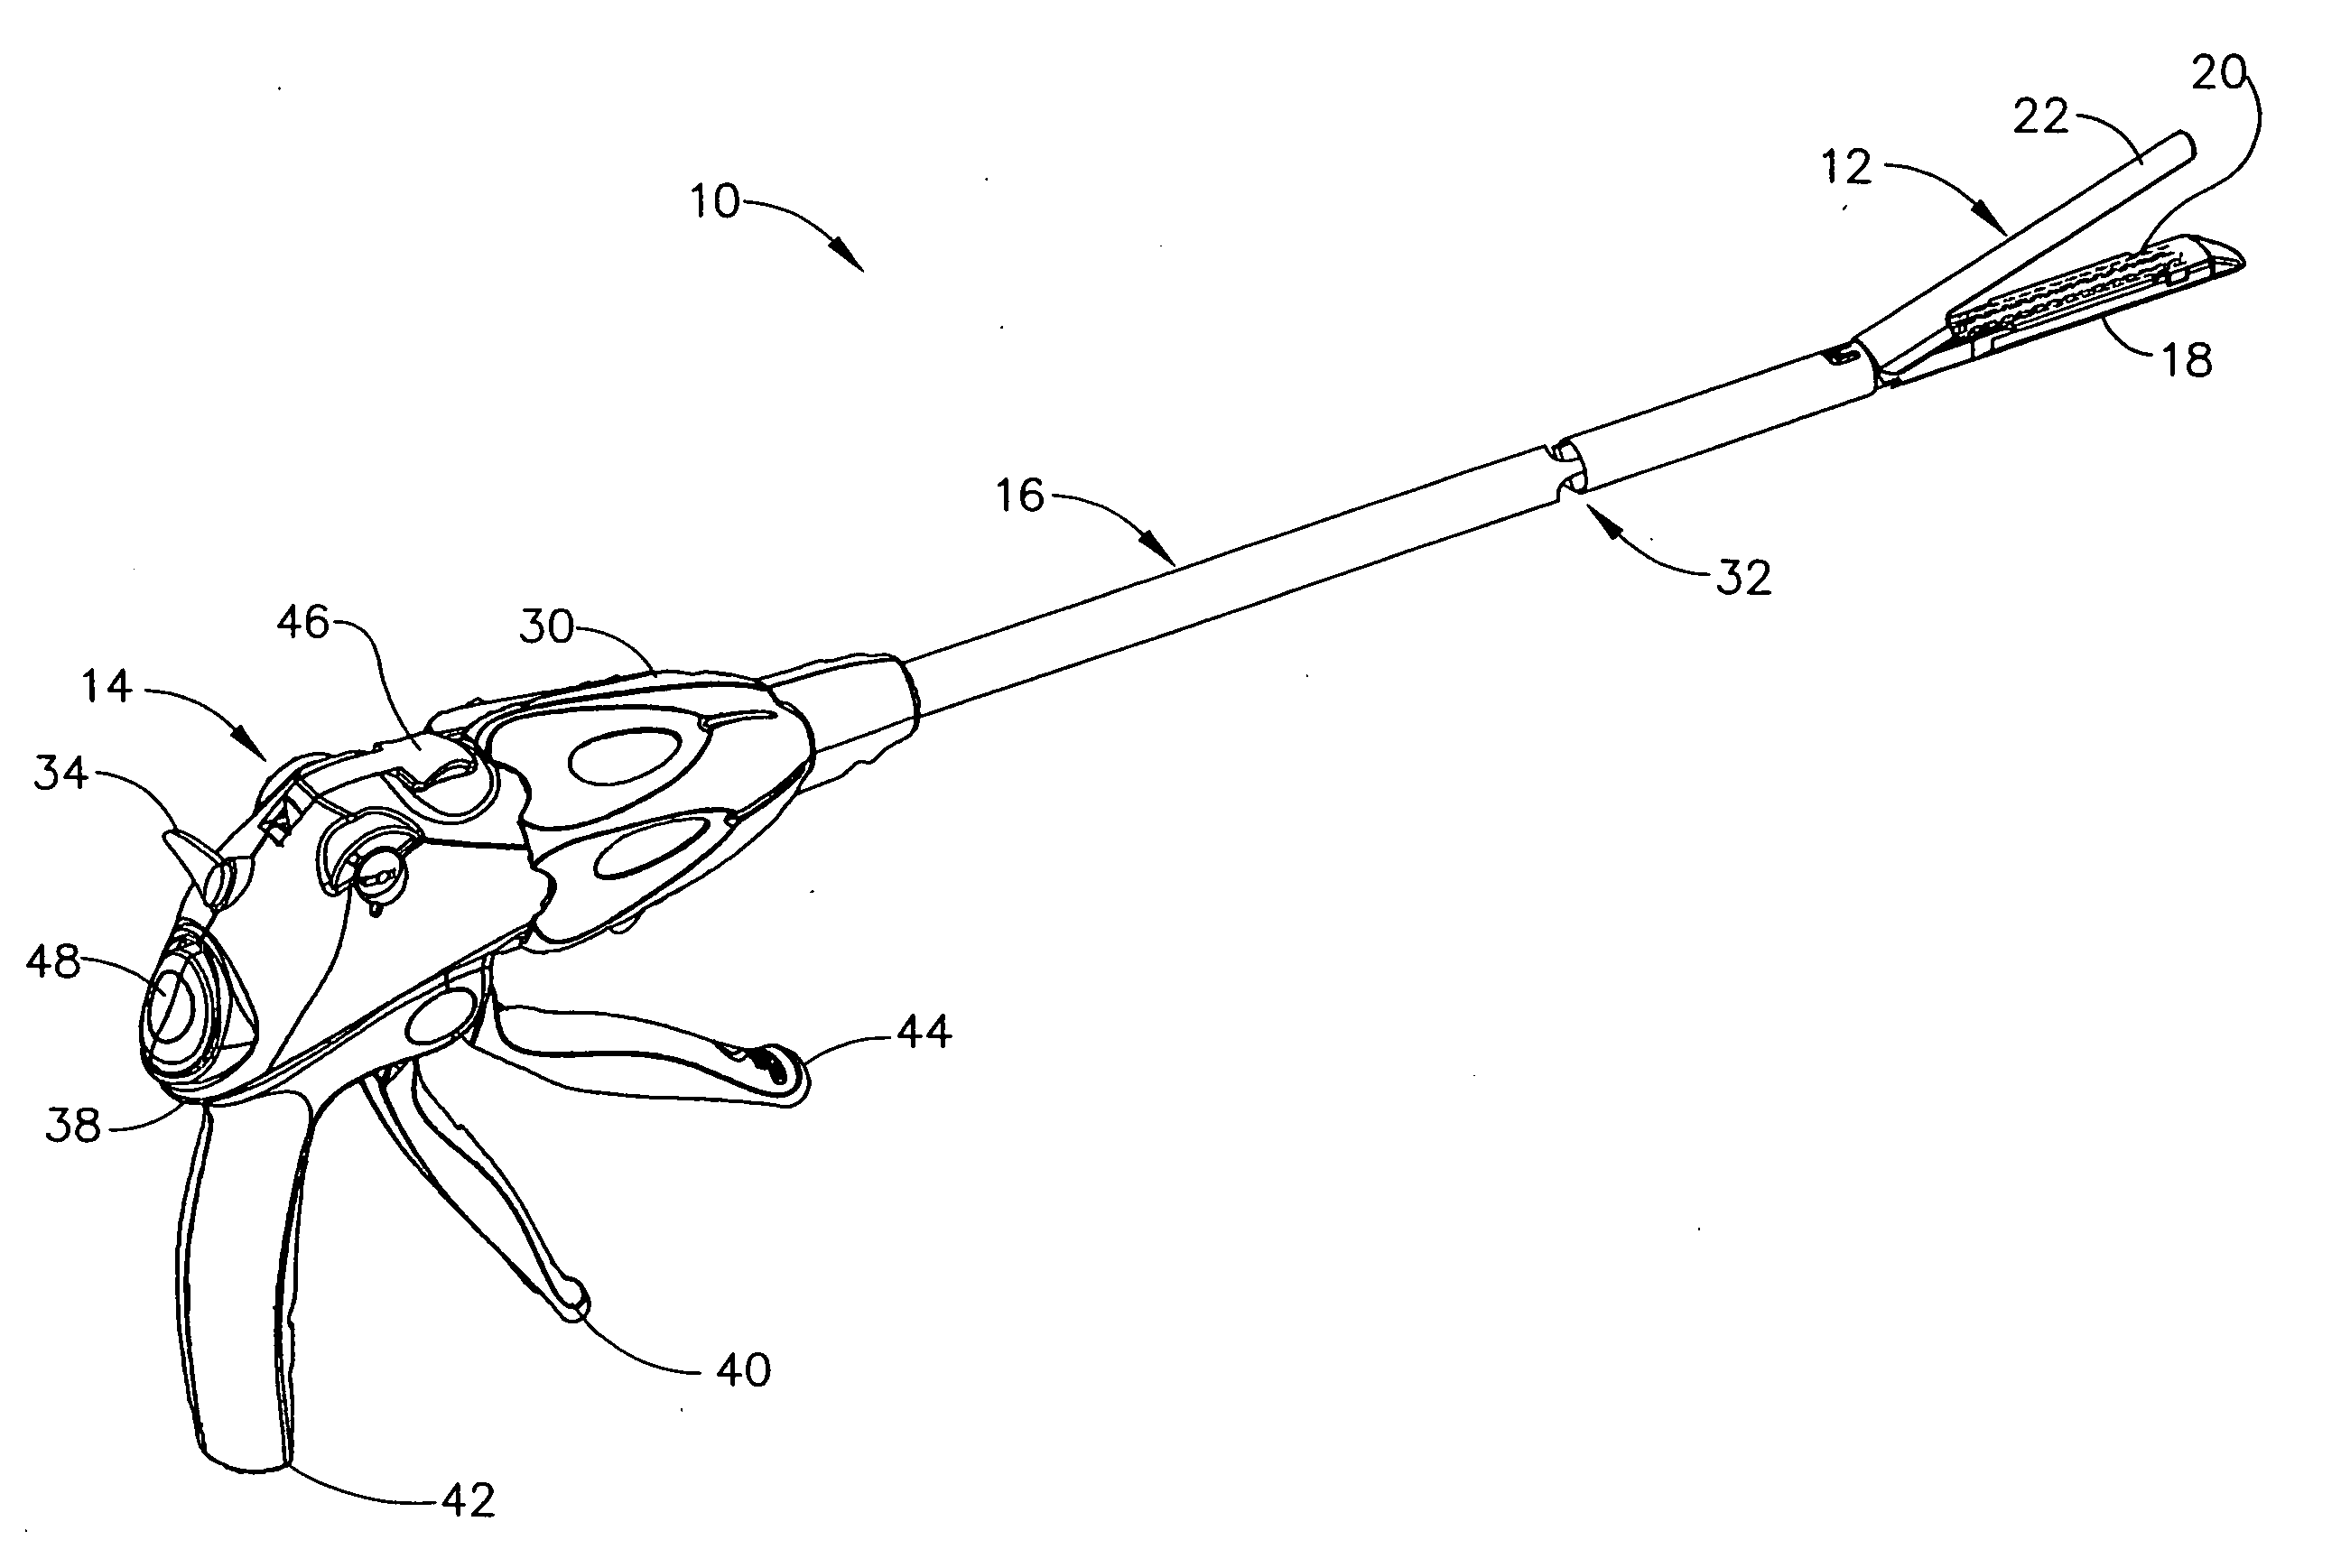 Surgical instrument incorporating an electrically actuated pivoting articulation mechanism